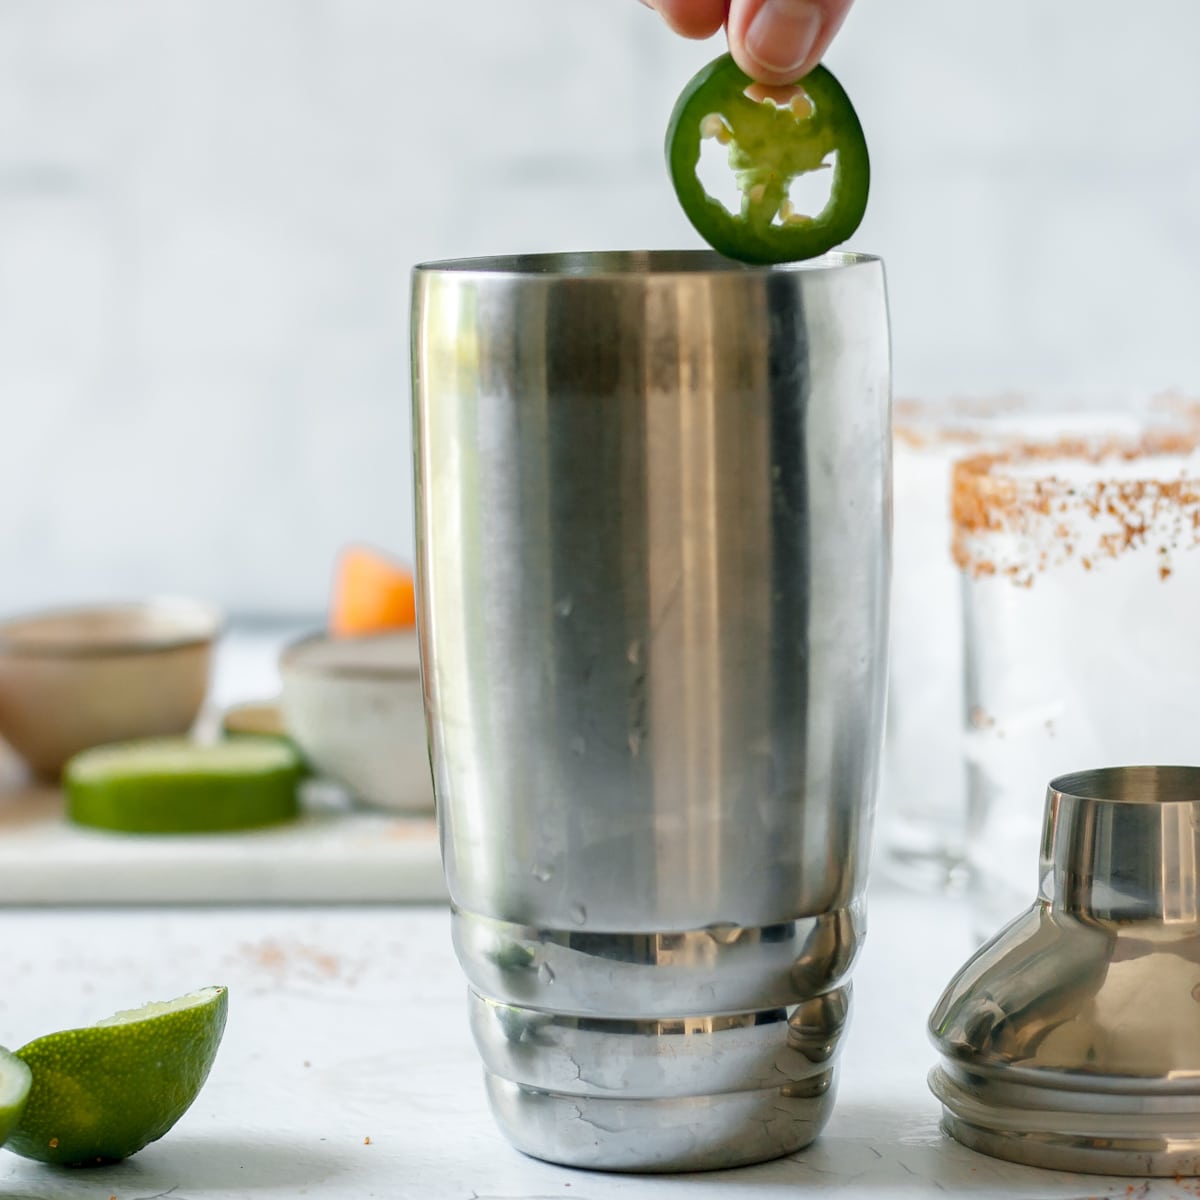 jalapeno slice dropping into a cocktail shaker